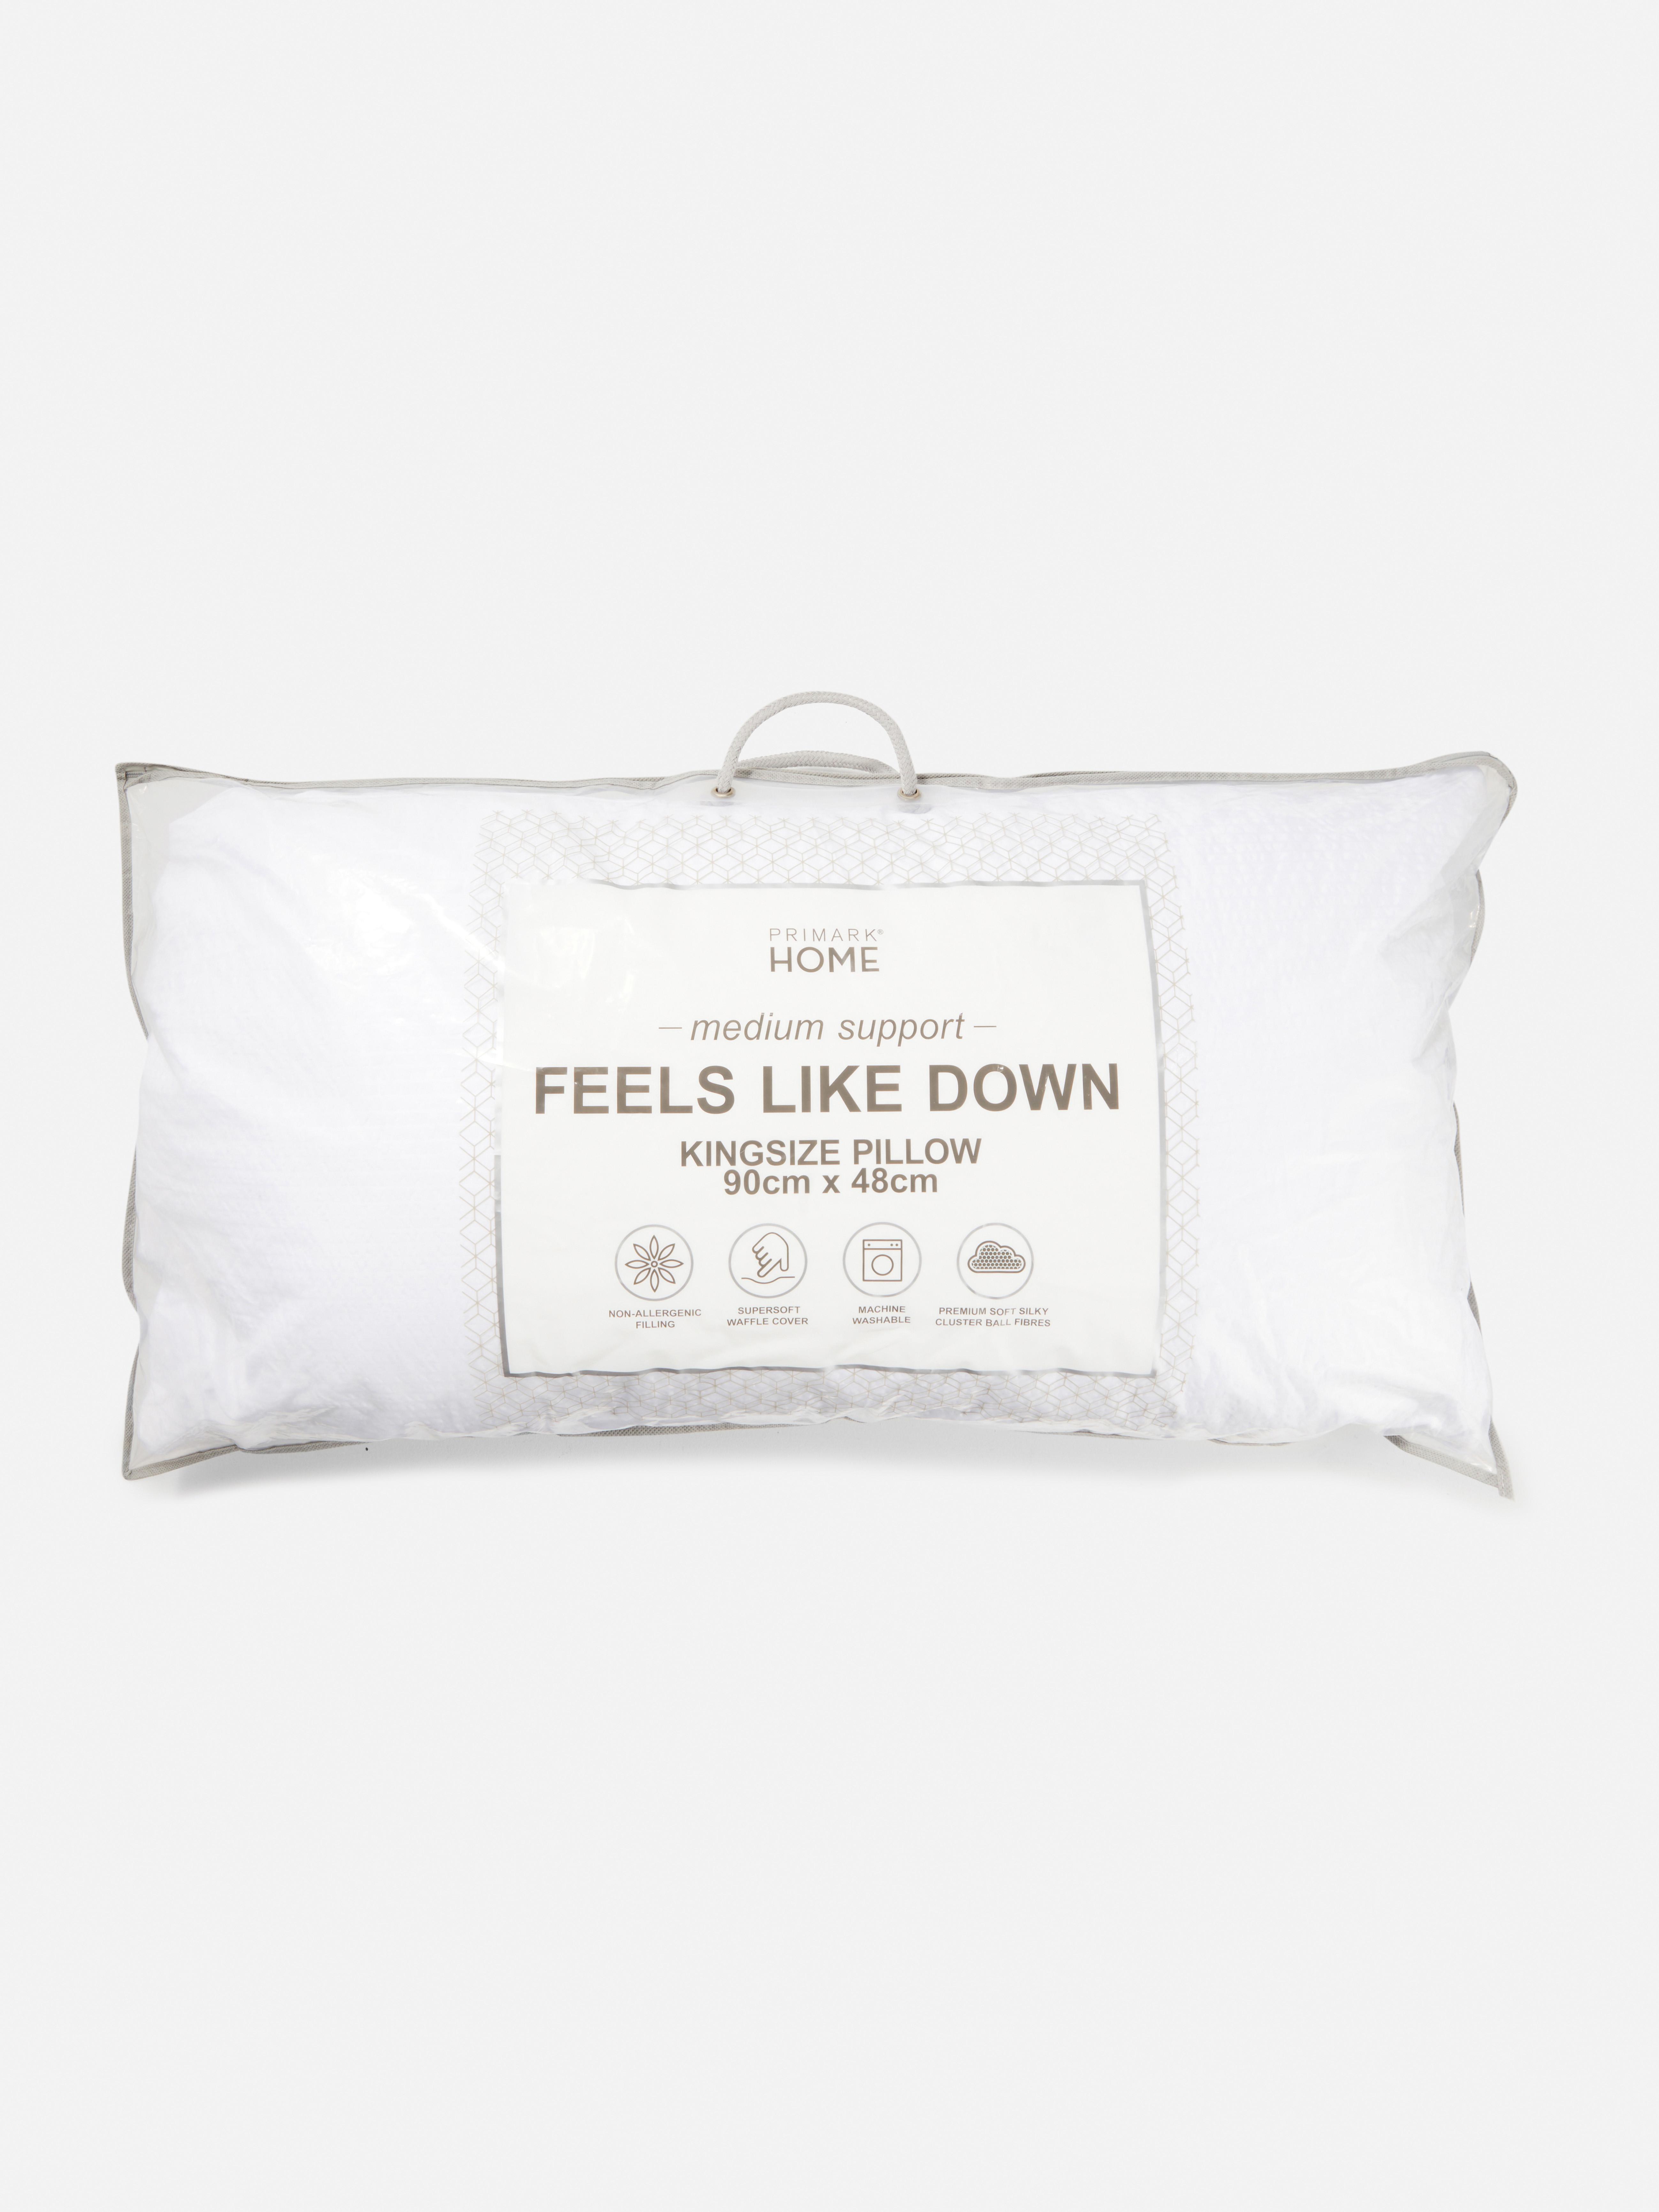 Medium Support King Sized Pillow